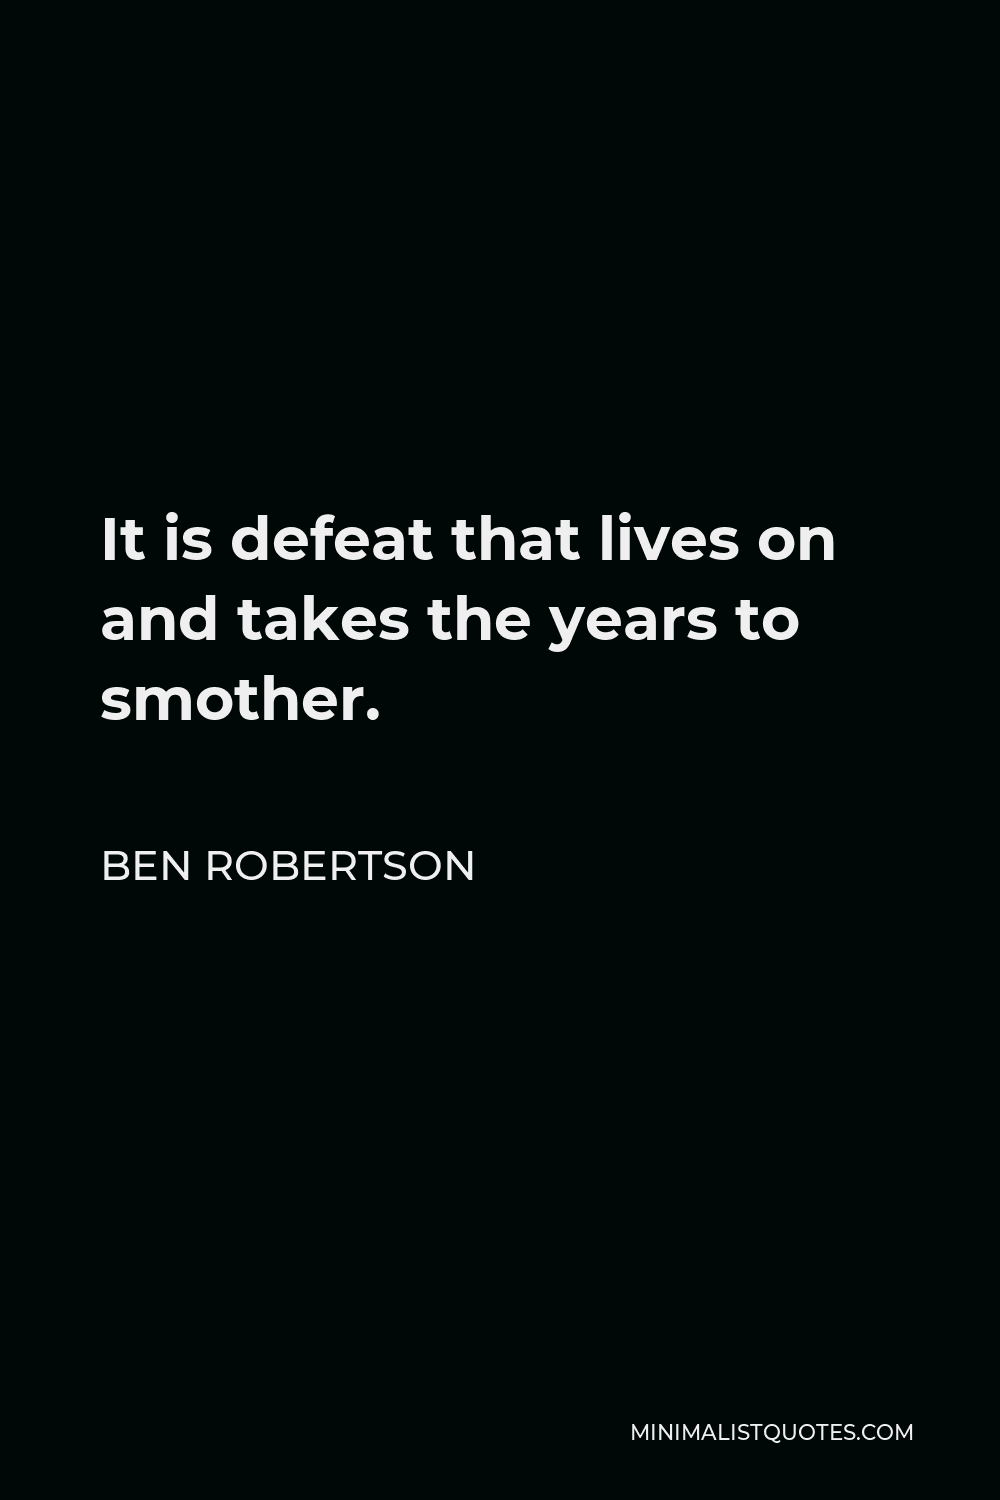 Ben Robertson Quote - It is defeat that lives on and takes the years to smother.